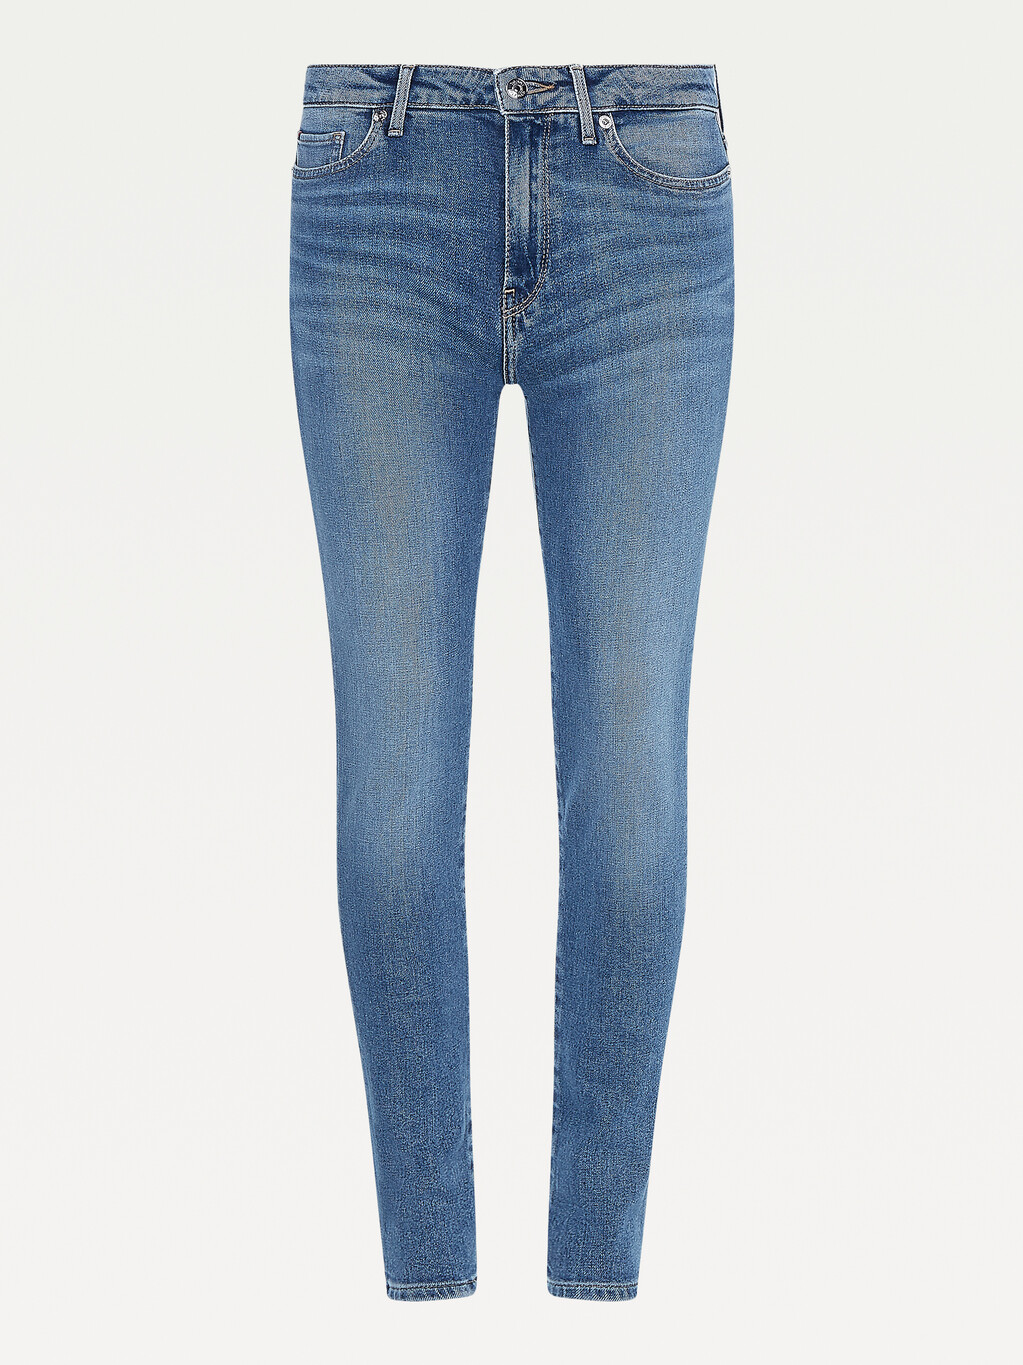 Venice Mid Rise Slim Faded Jeans